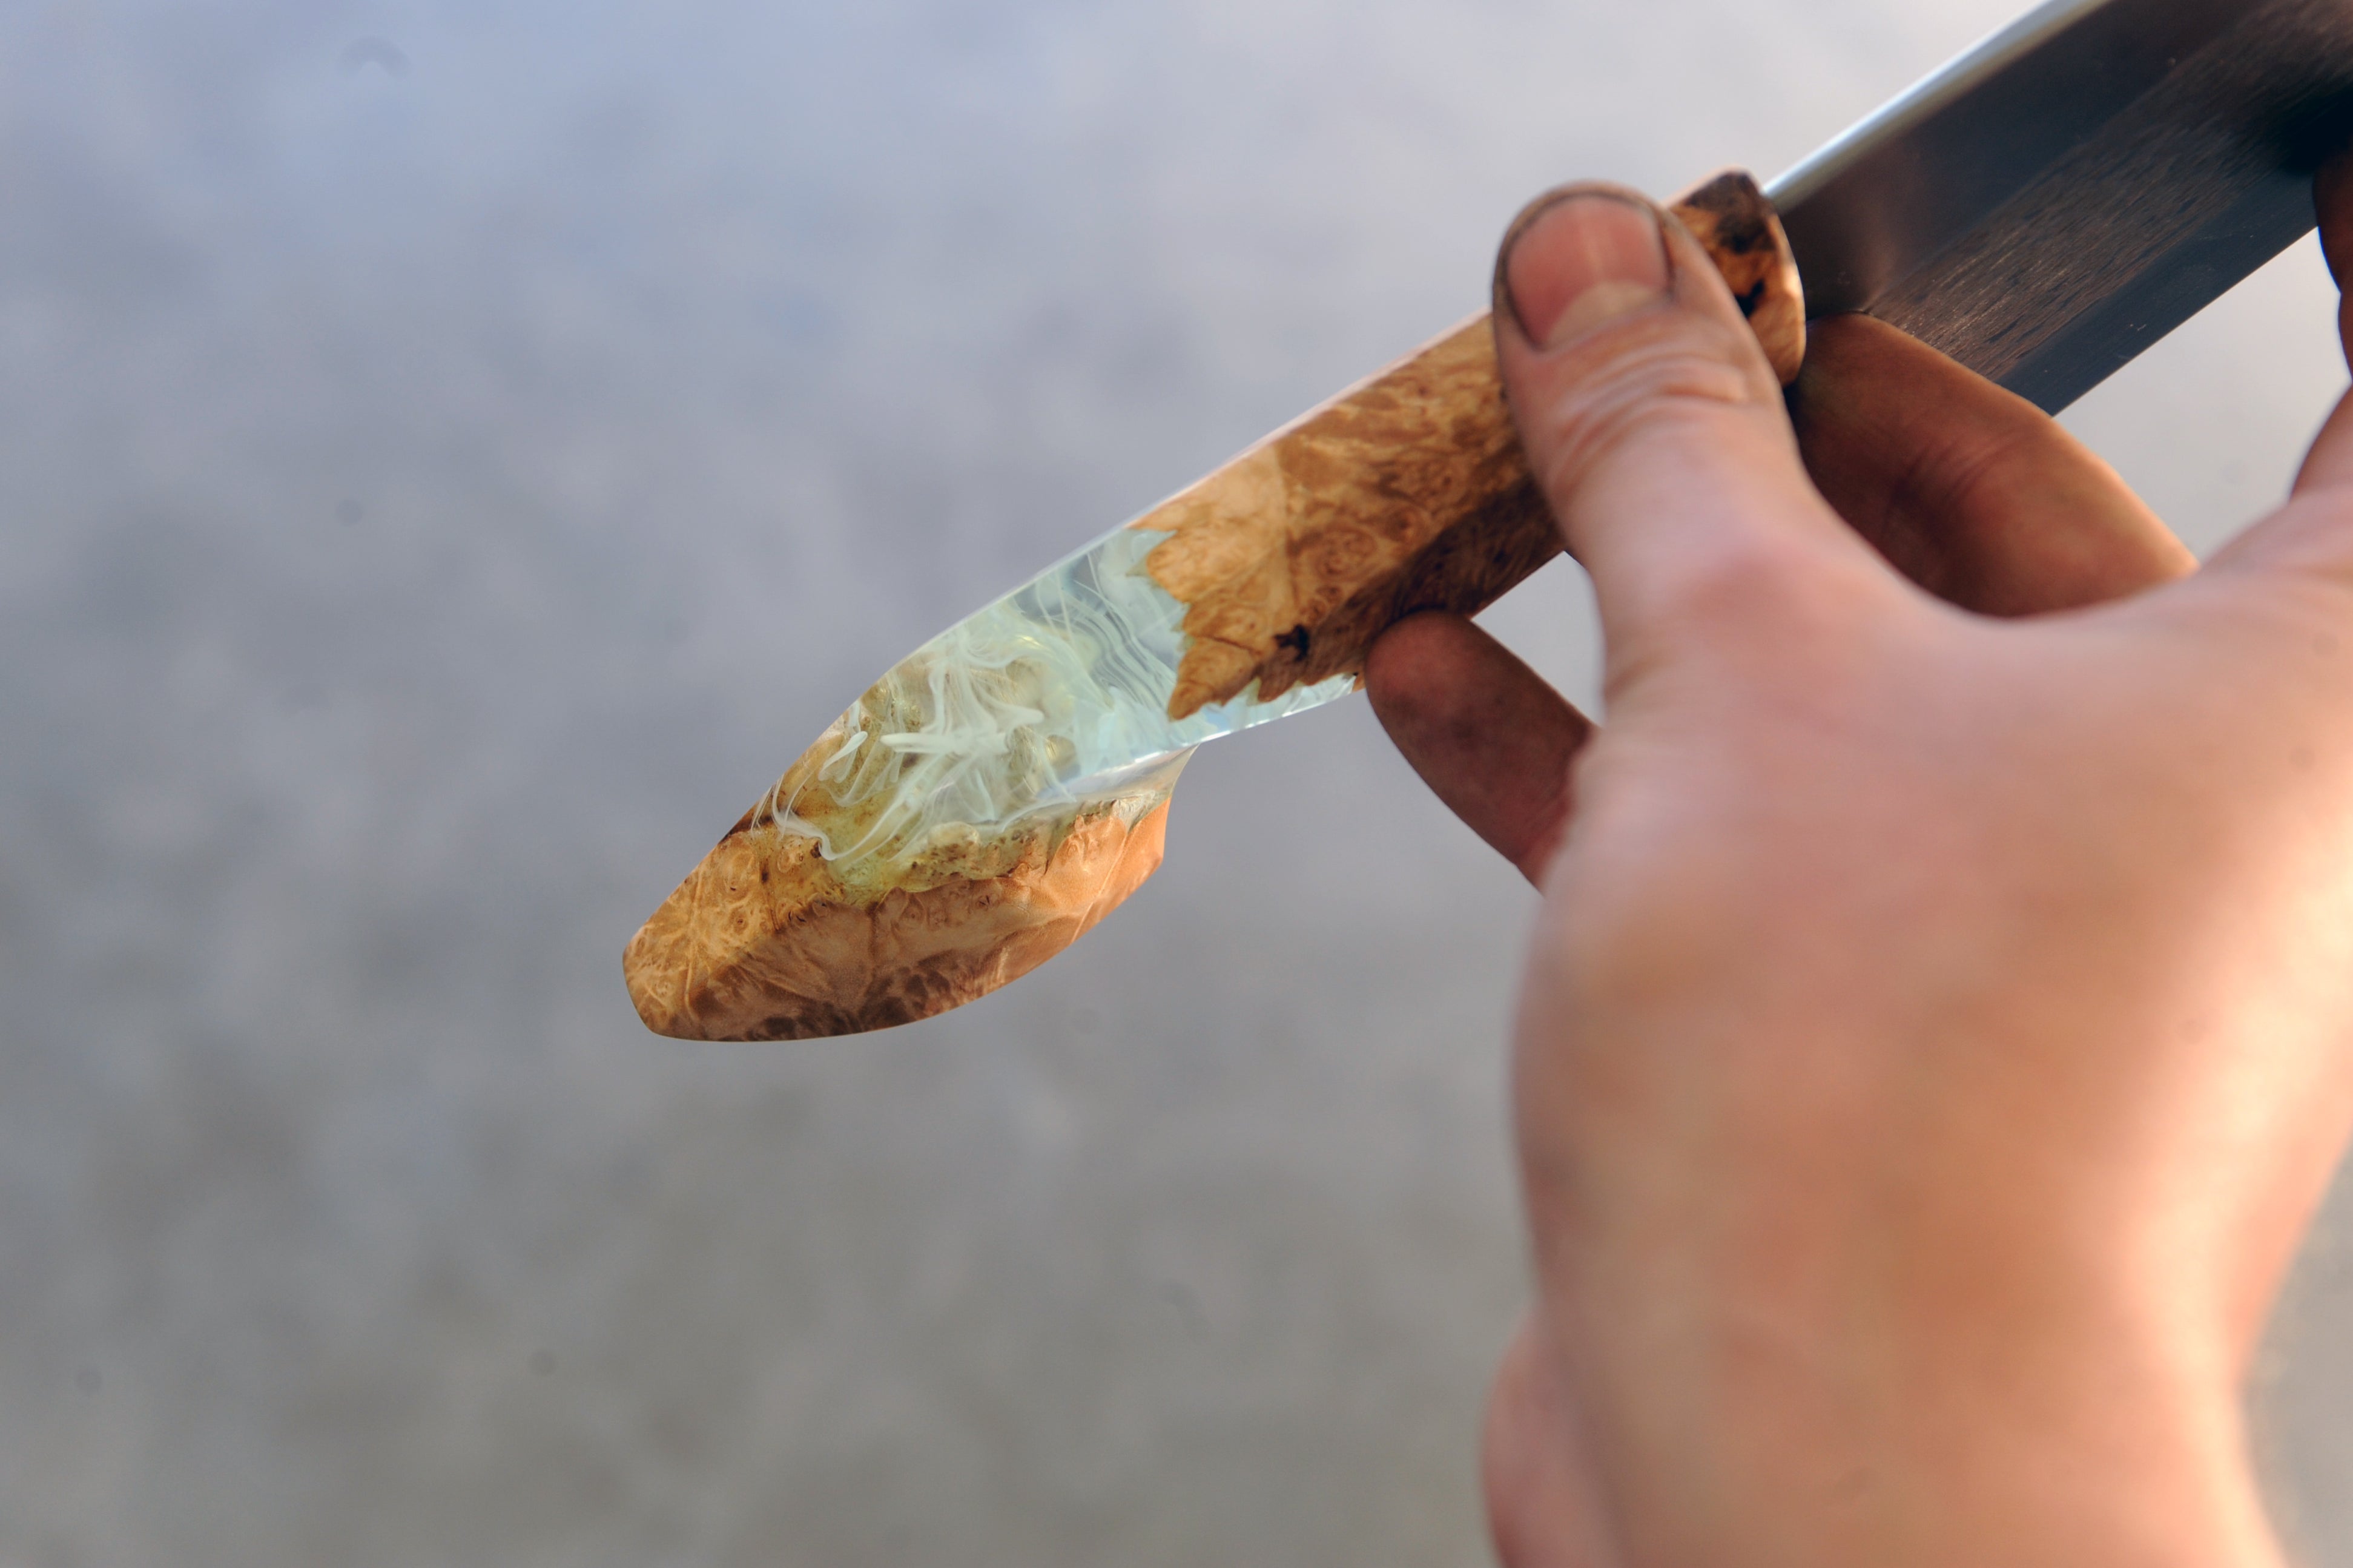 Maple Burl & Copper S-Grind Chefs Knife